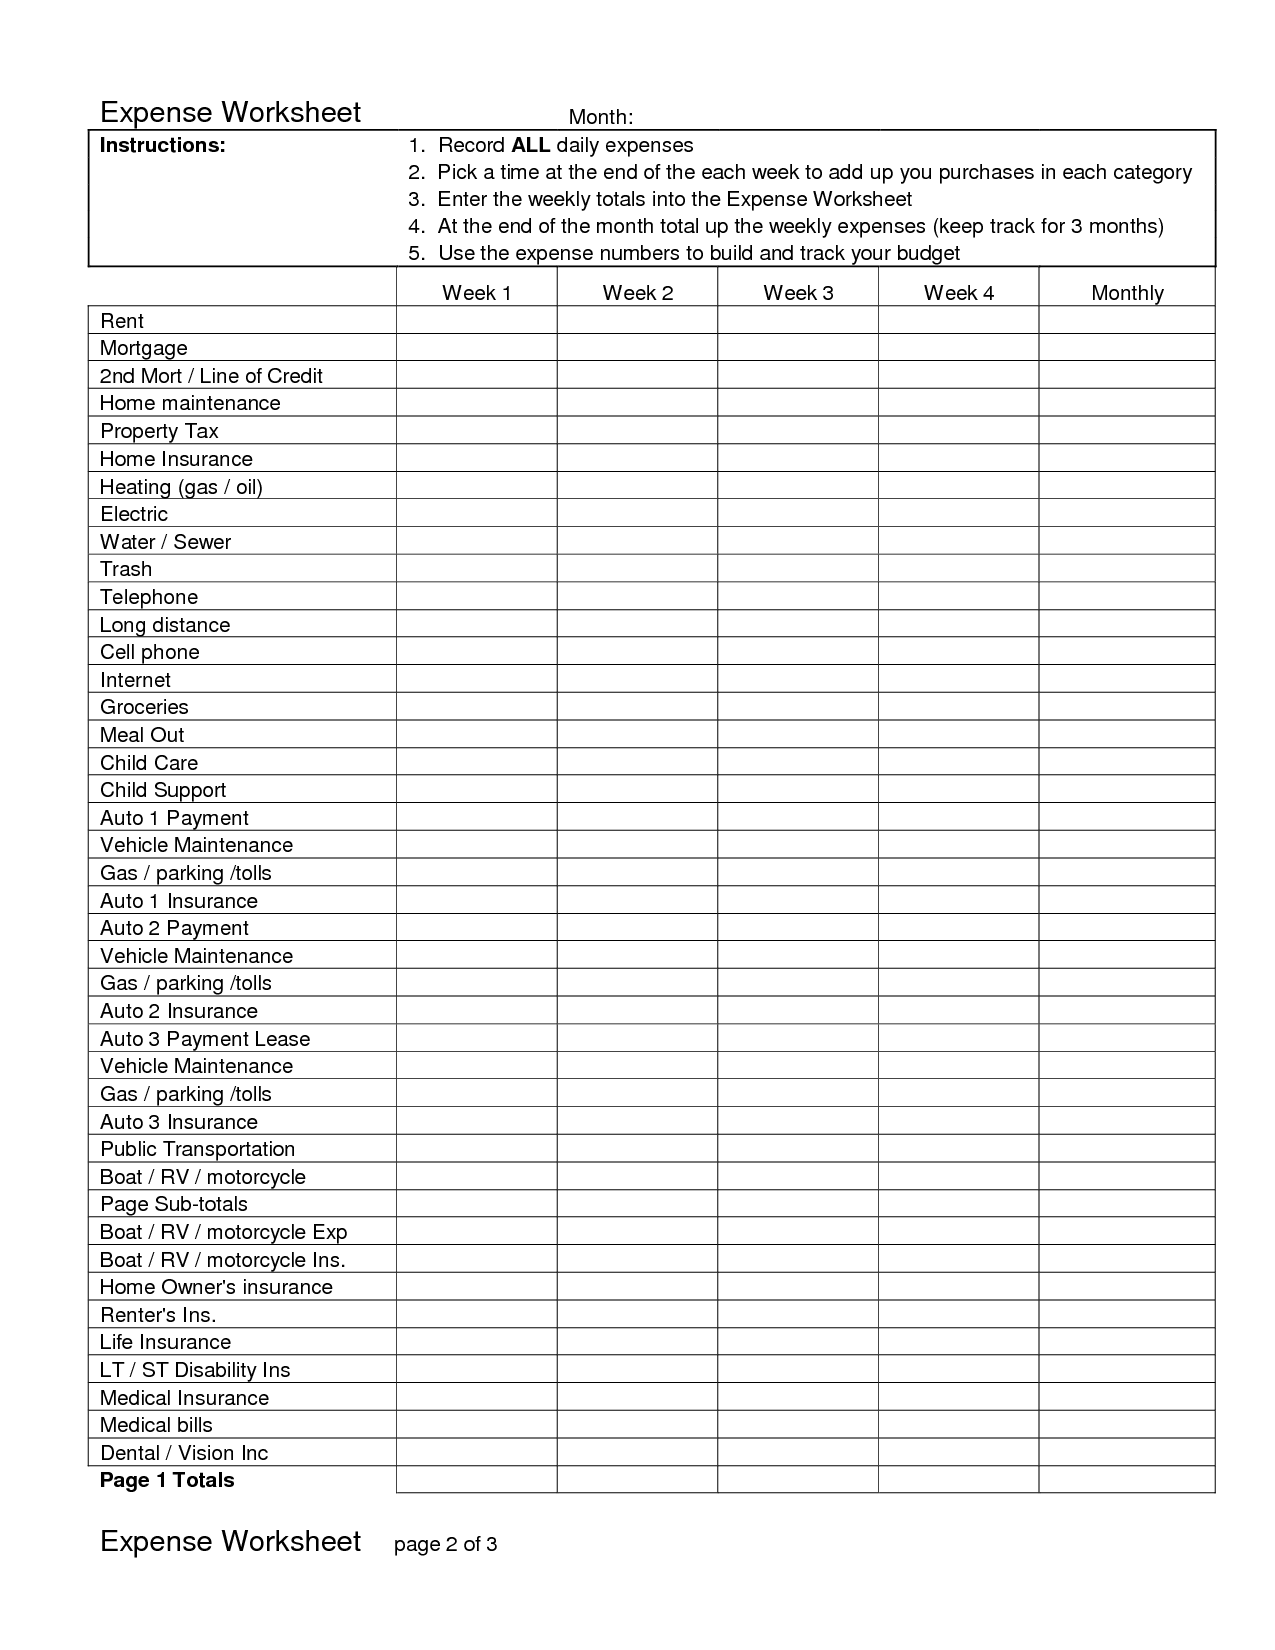 16-best-images-of-free-income-and-expense-worksheet-blank-monthly